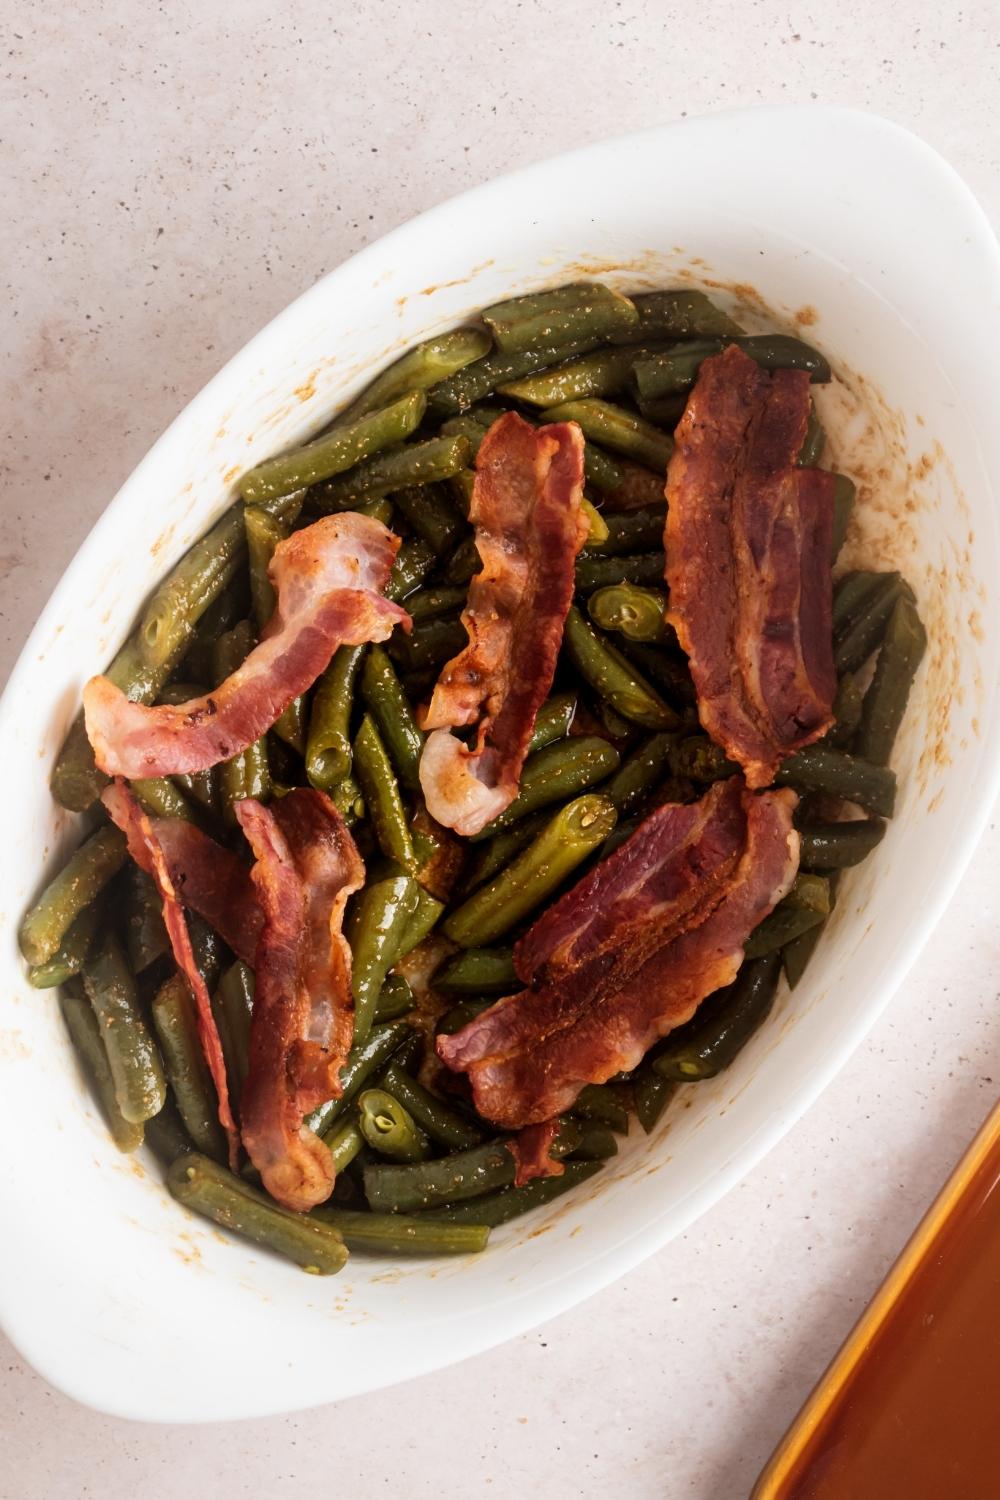 Six slices of bacon on top of green beans and a white casserole dish.